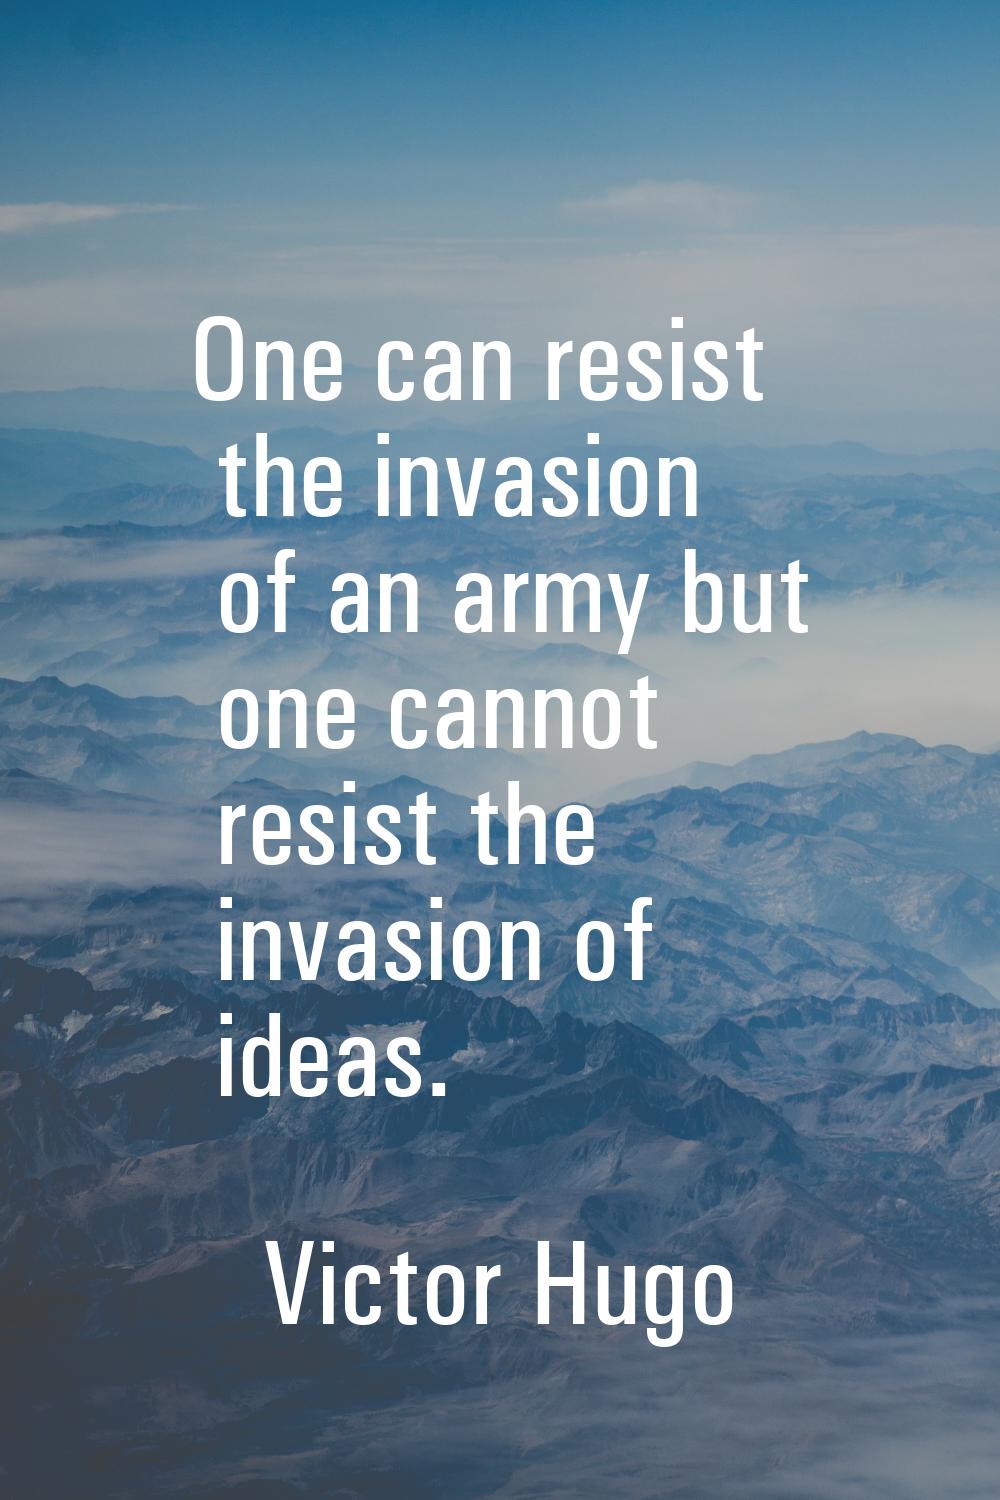 One can resist the invasion of an army but one cannot resist the invasion of ideas.